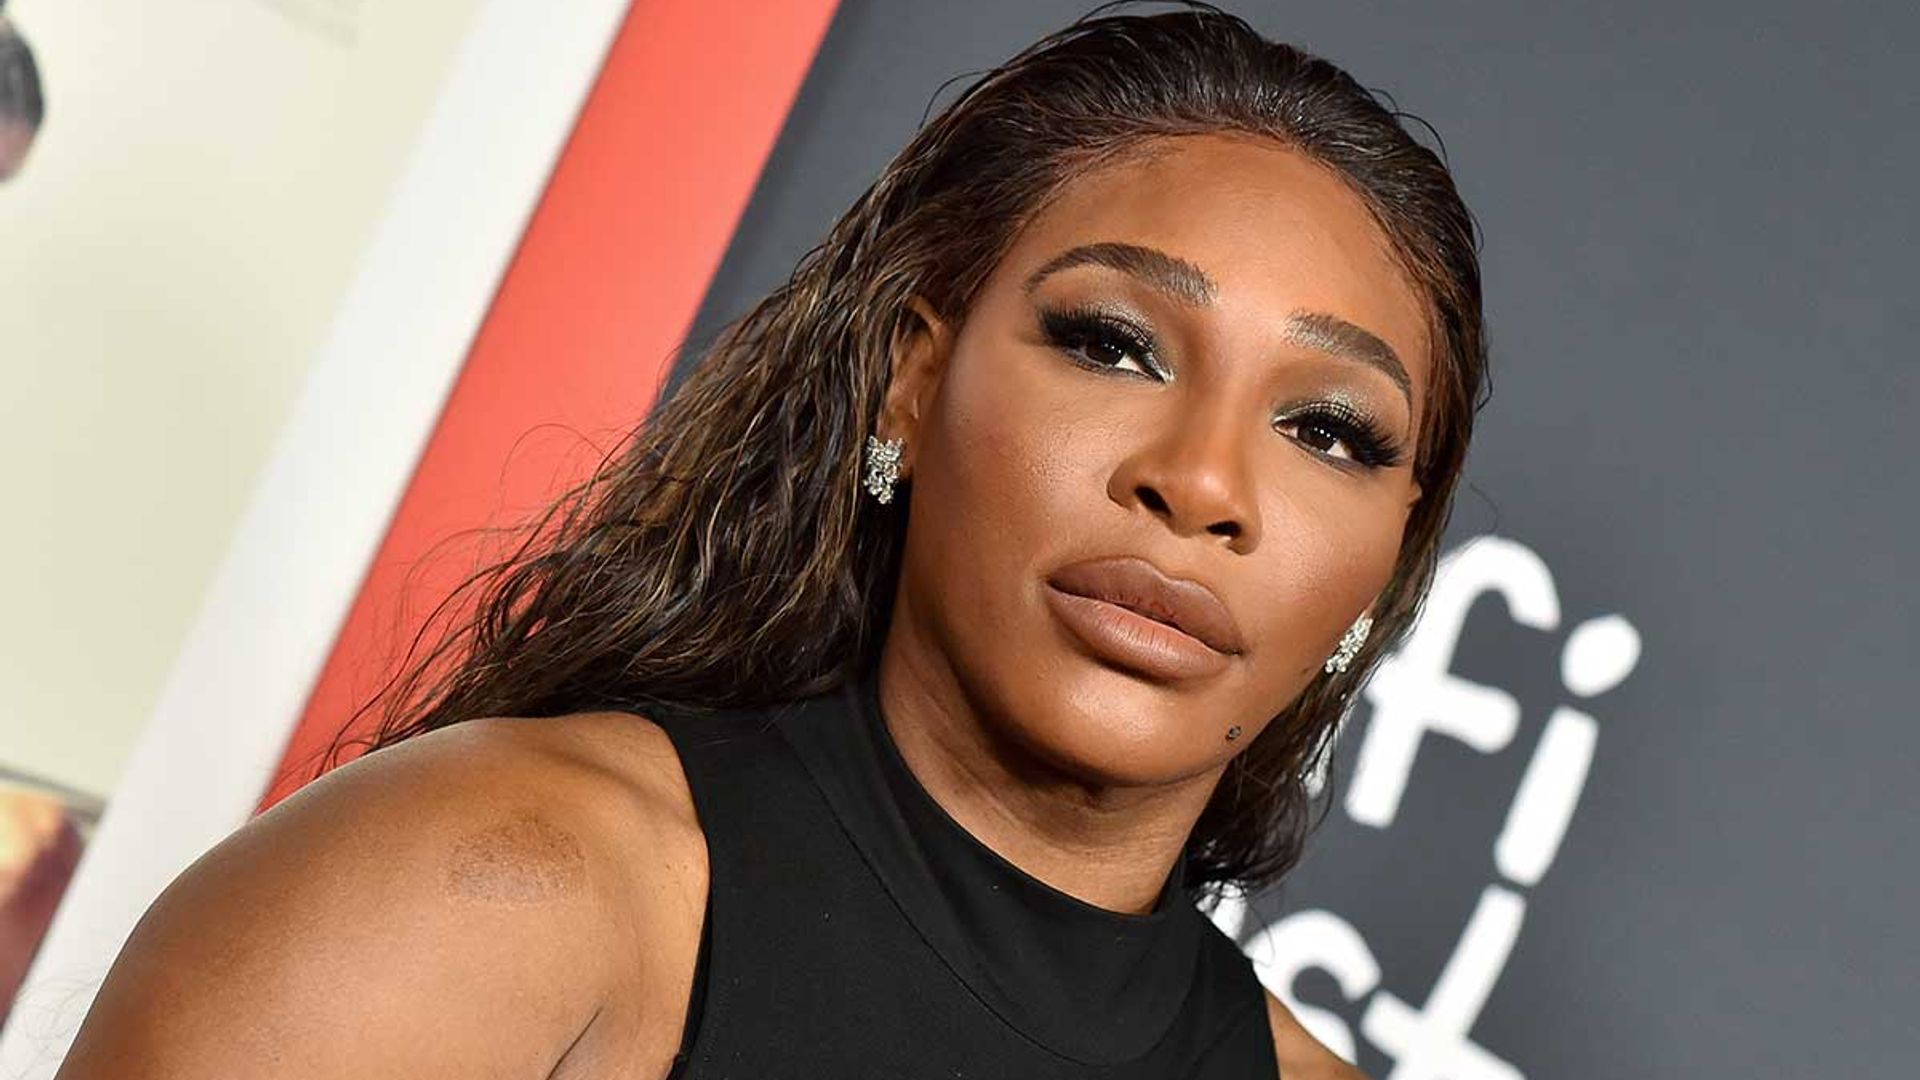 Serena Williams shares heartbreaking statement after Texas school shooting